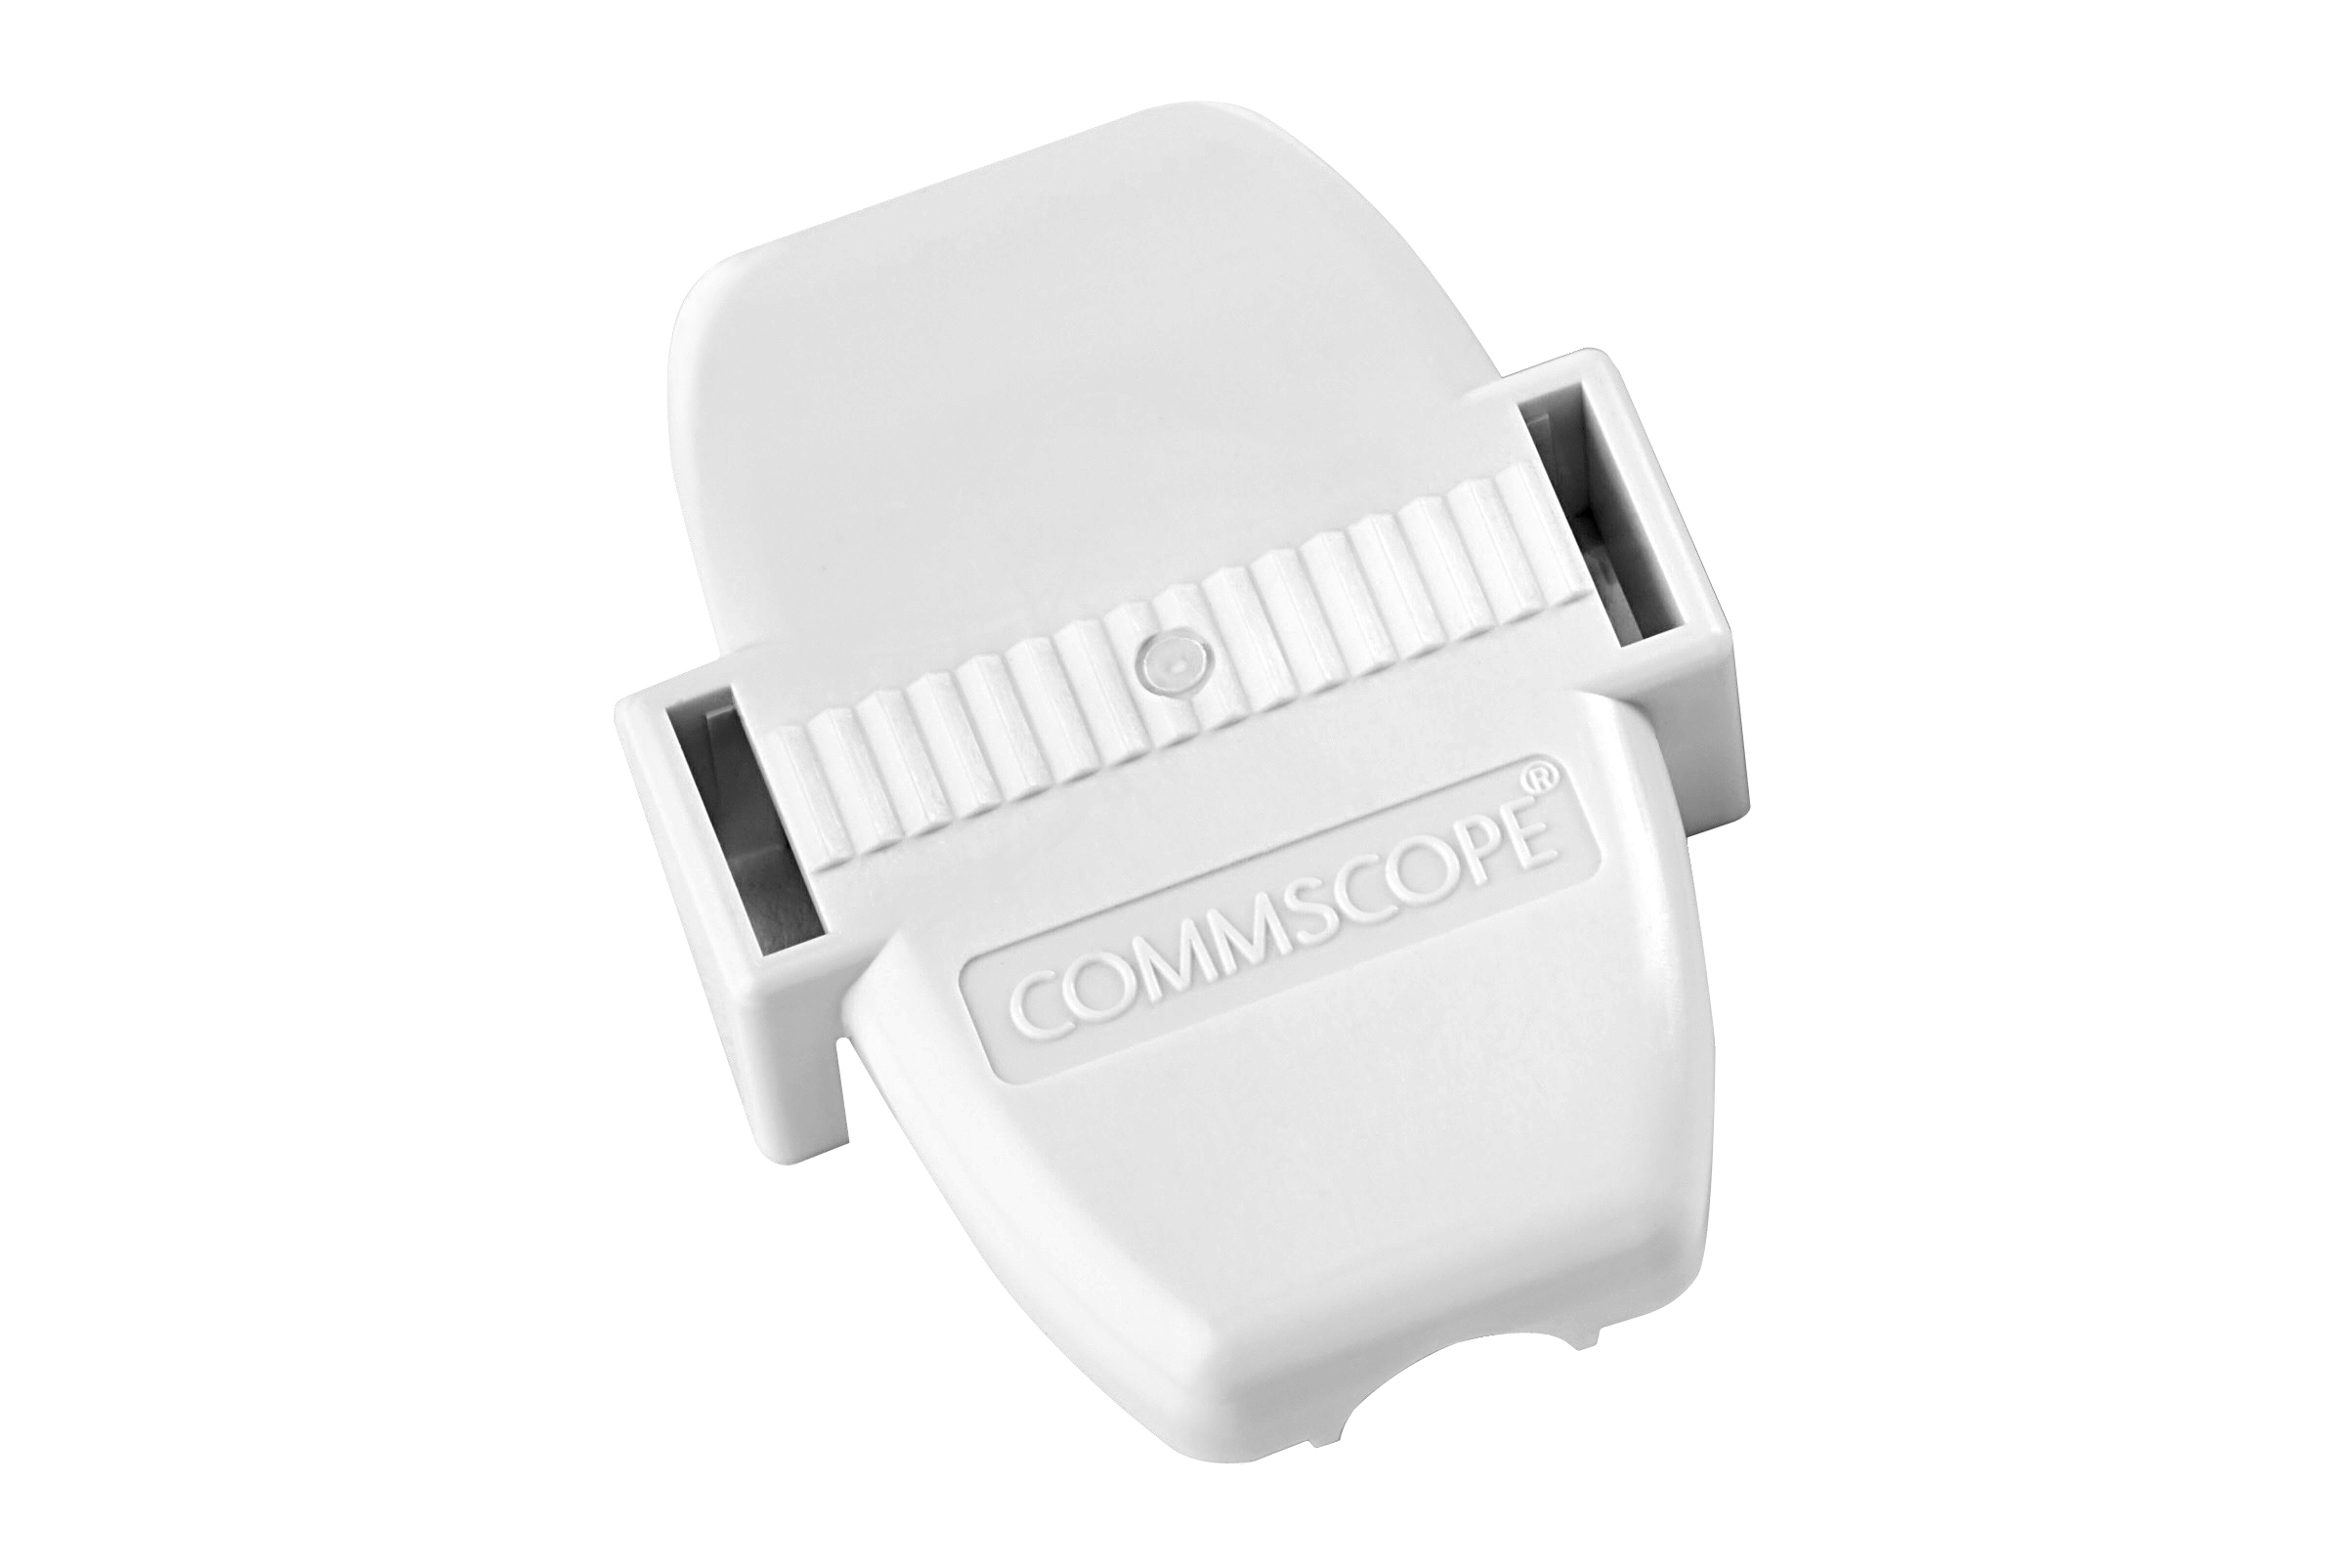 WHITE CCA Connector Only (No Patch Cable). Use with Cat 5e/6/6A UTP Patch Cords Cut in Half